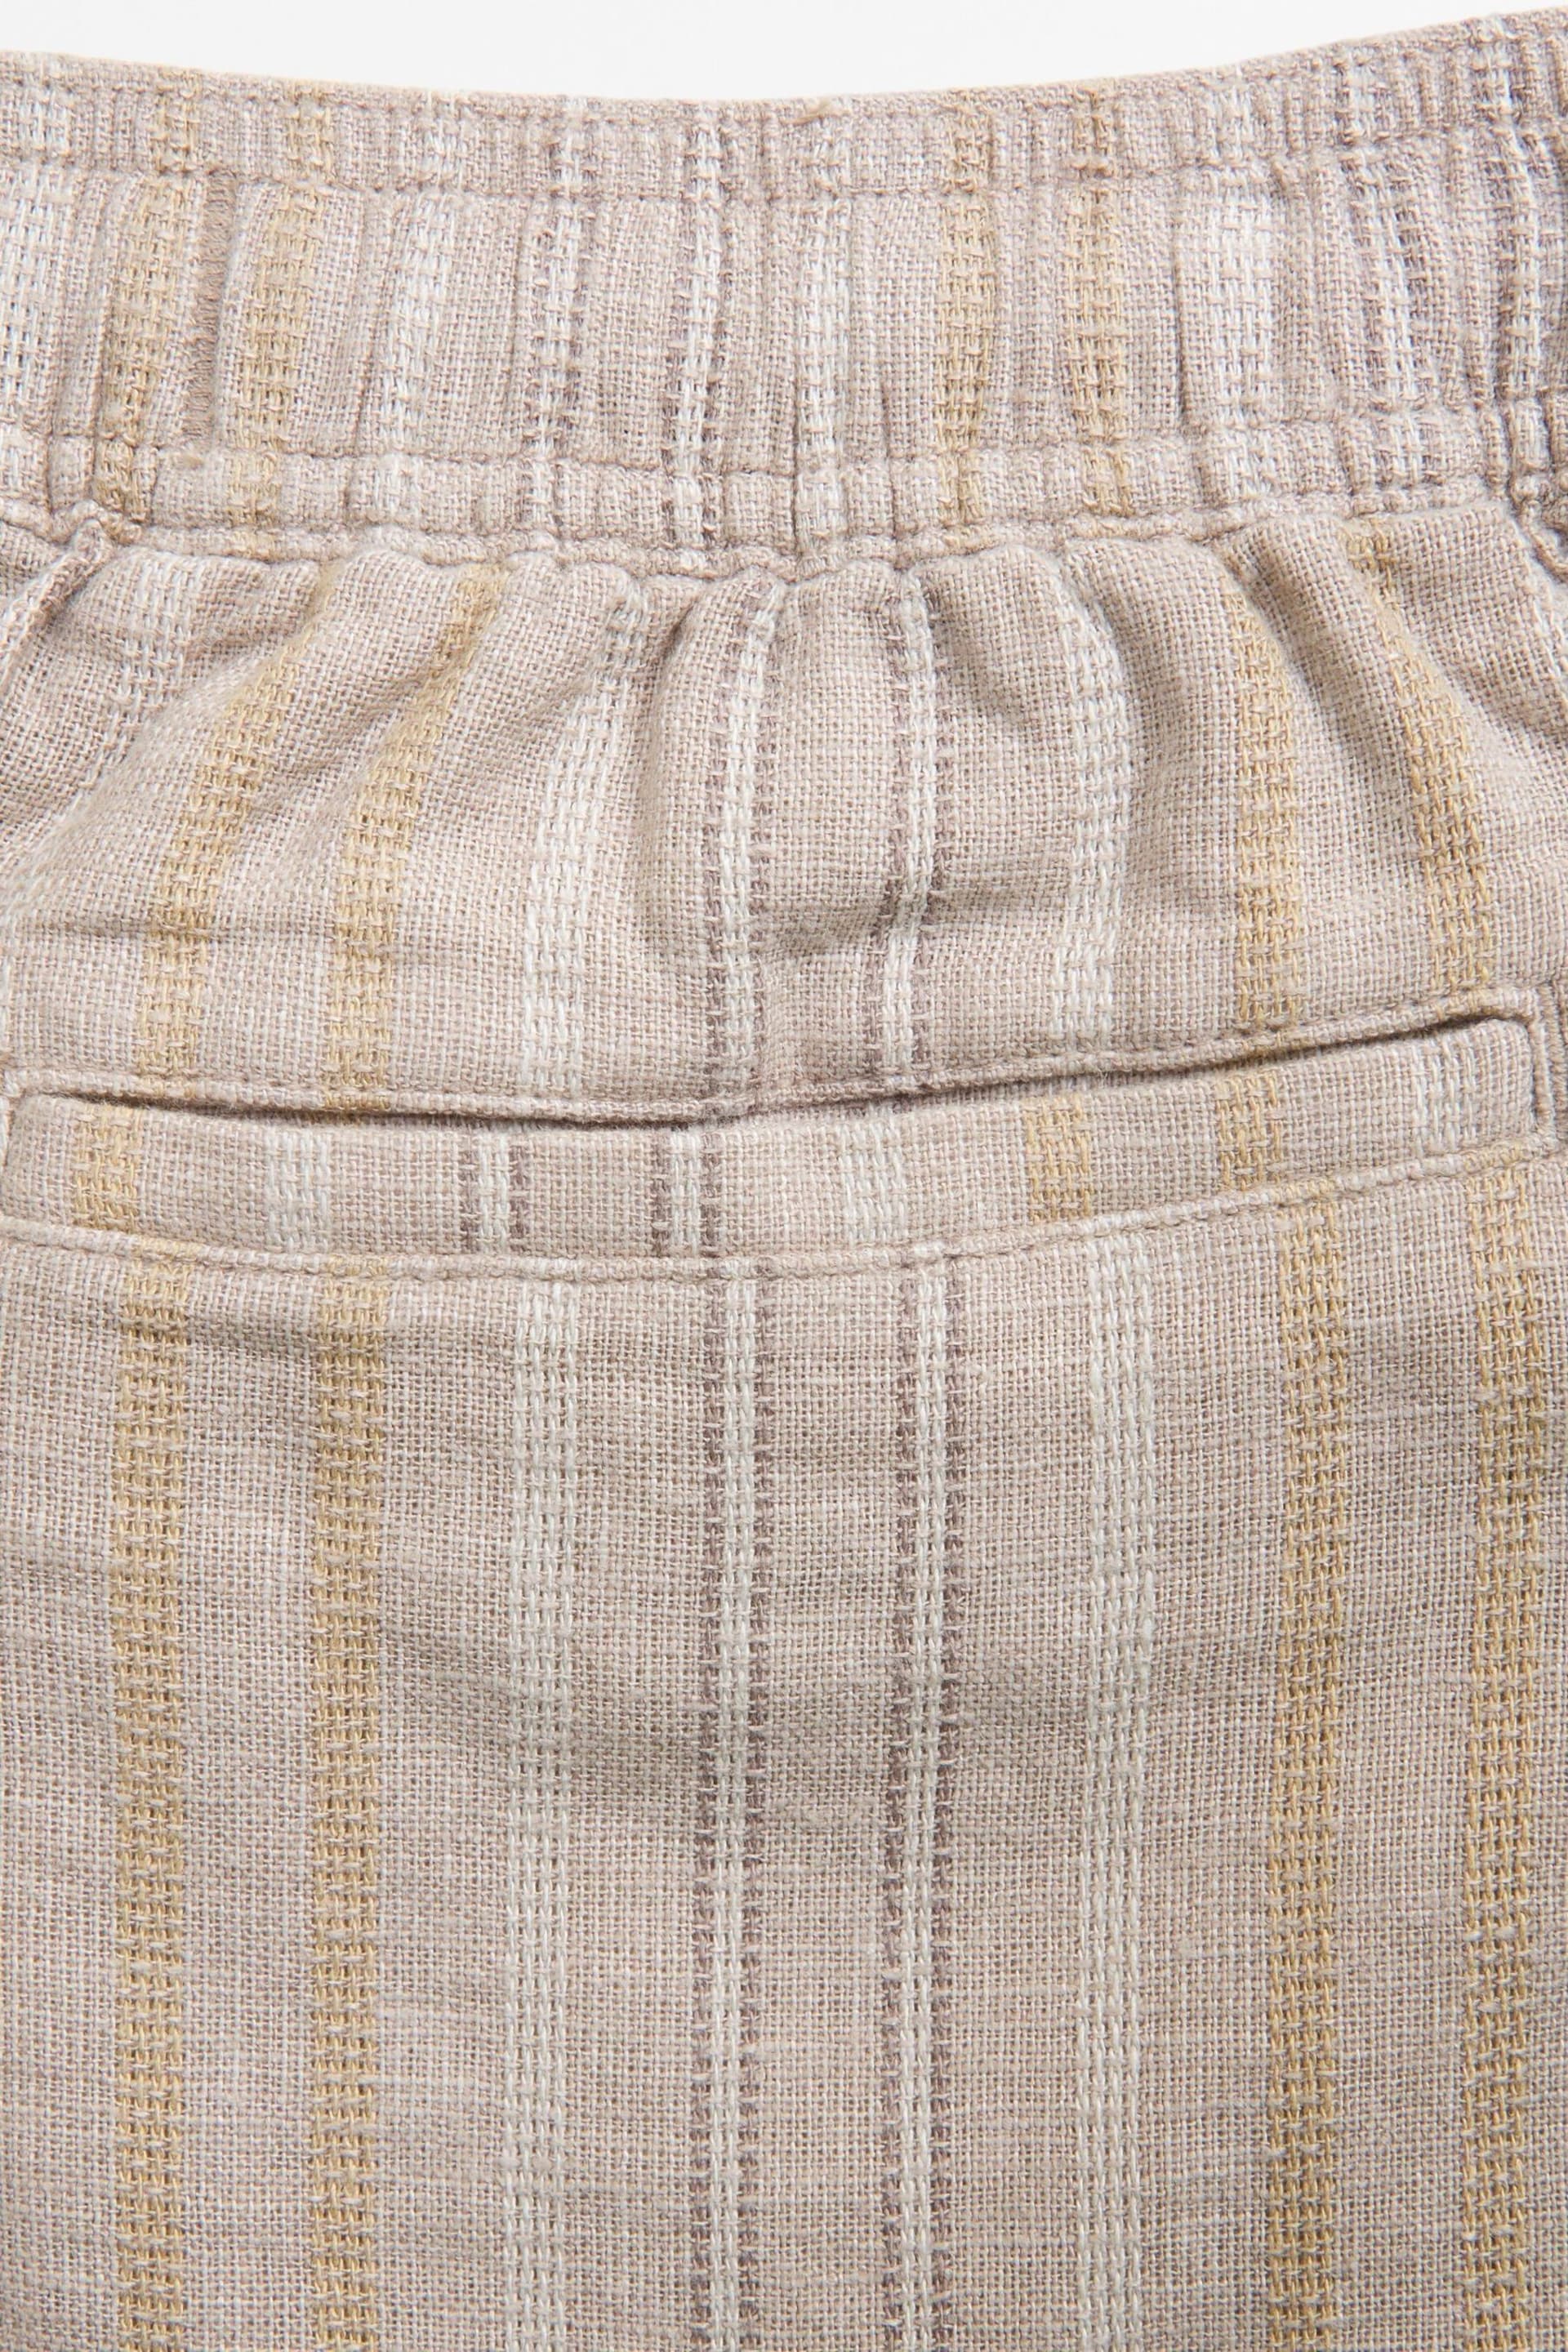 Abercrombie & Fitch Natural Knitted Stripe Short Sleeve Linen Shorts - Image 2 of 2